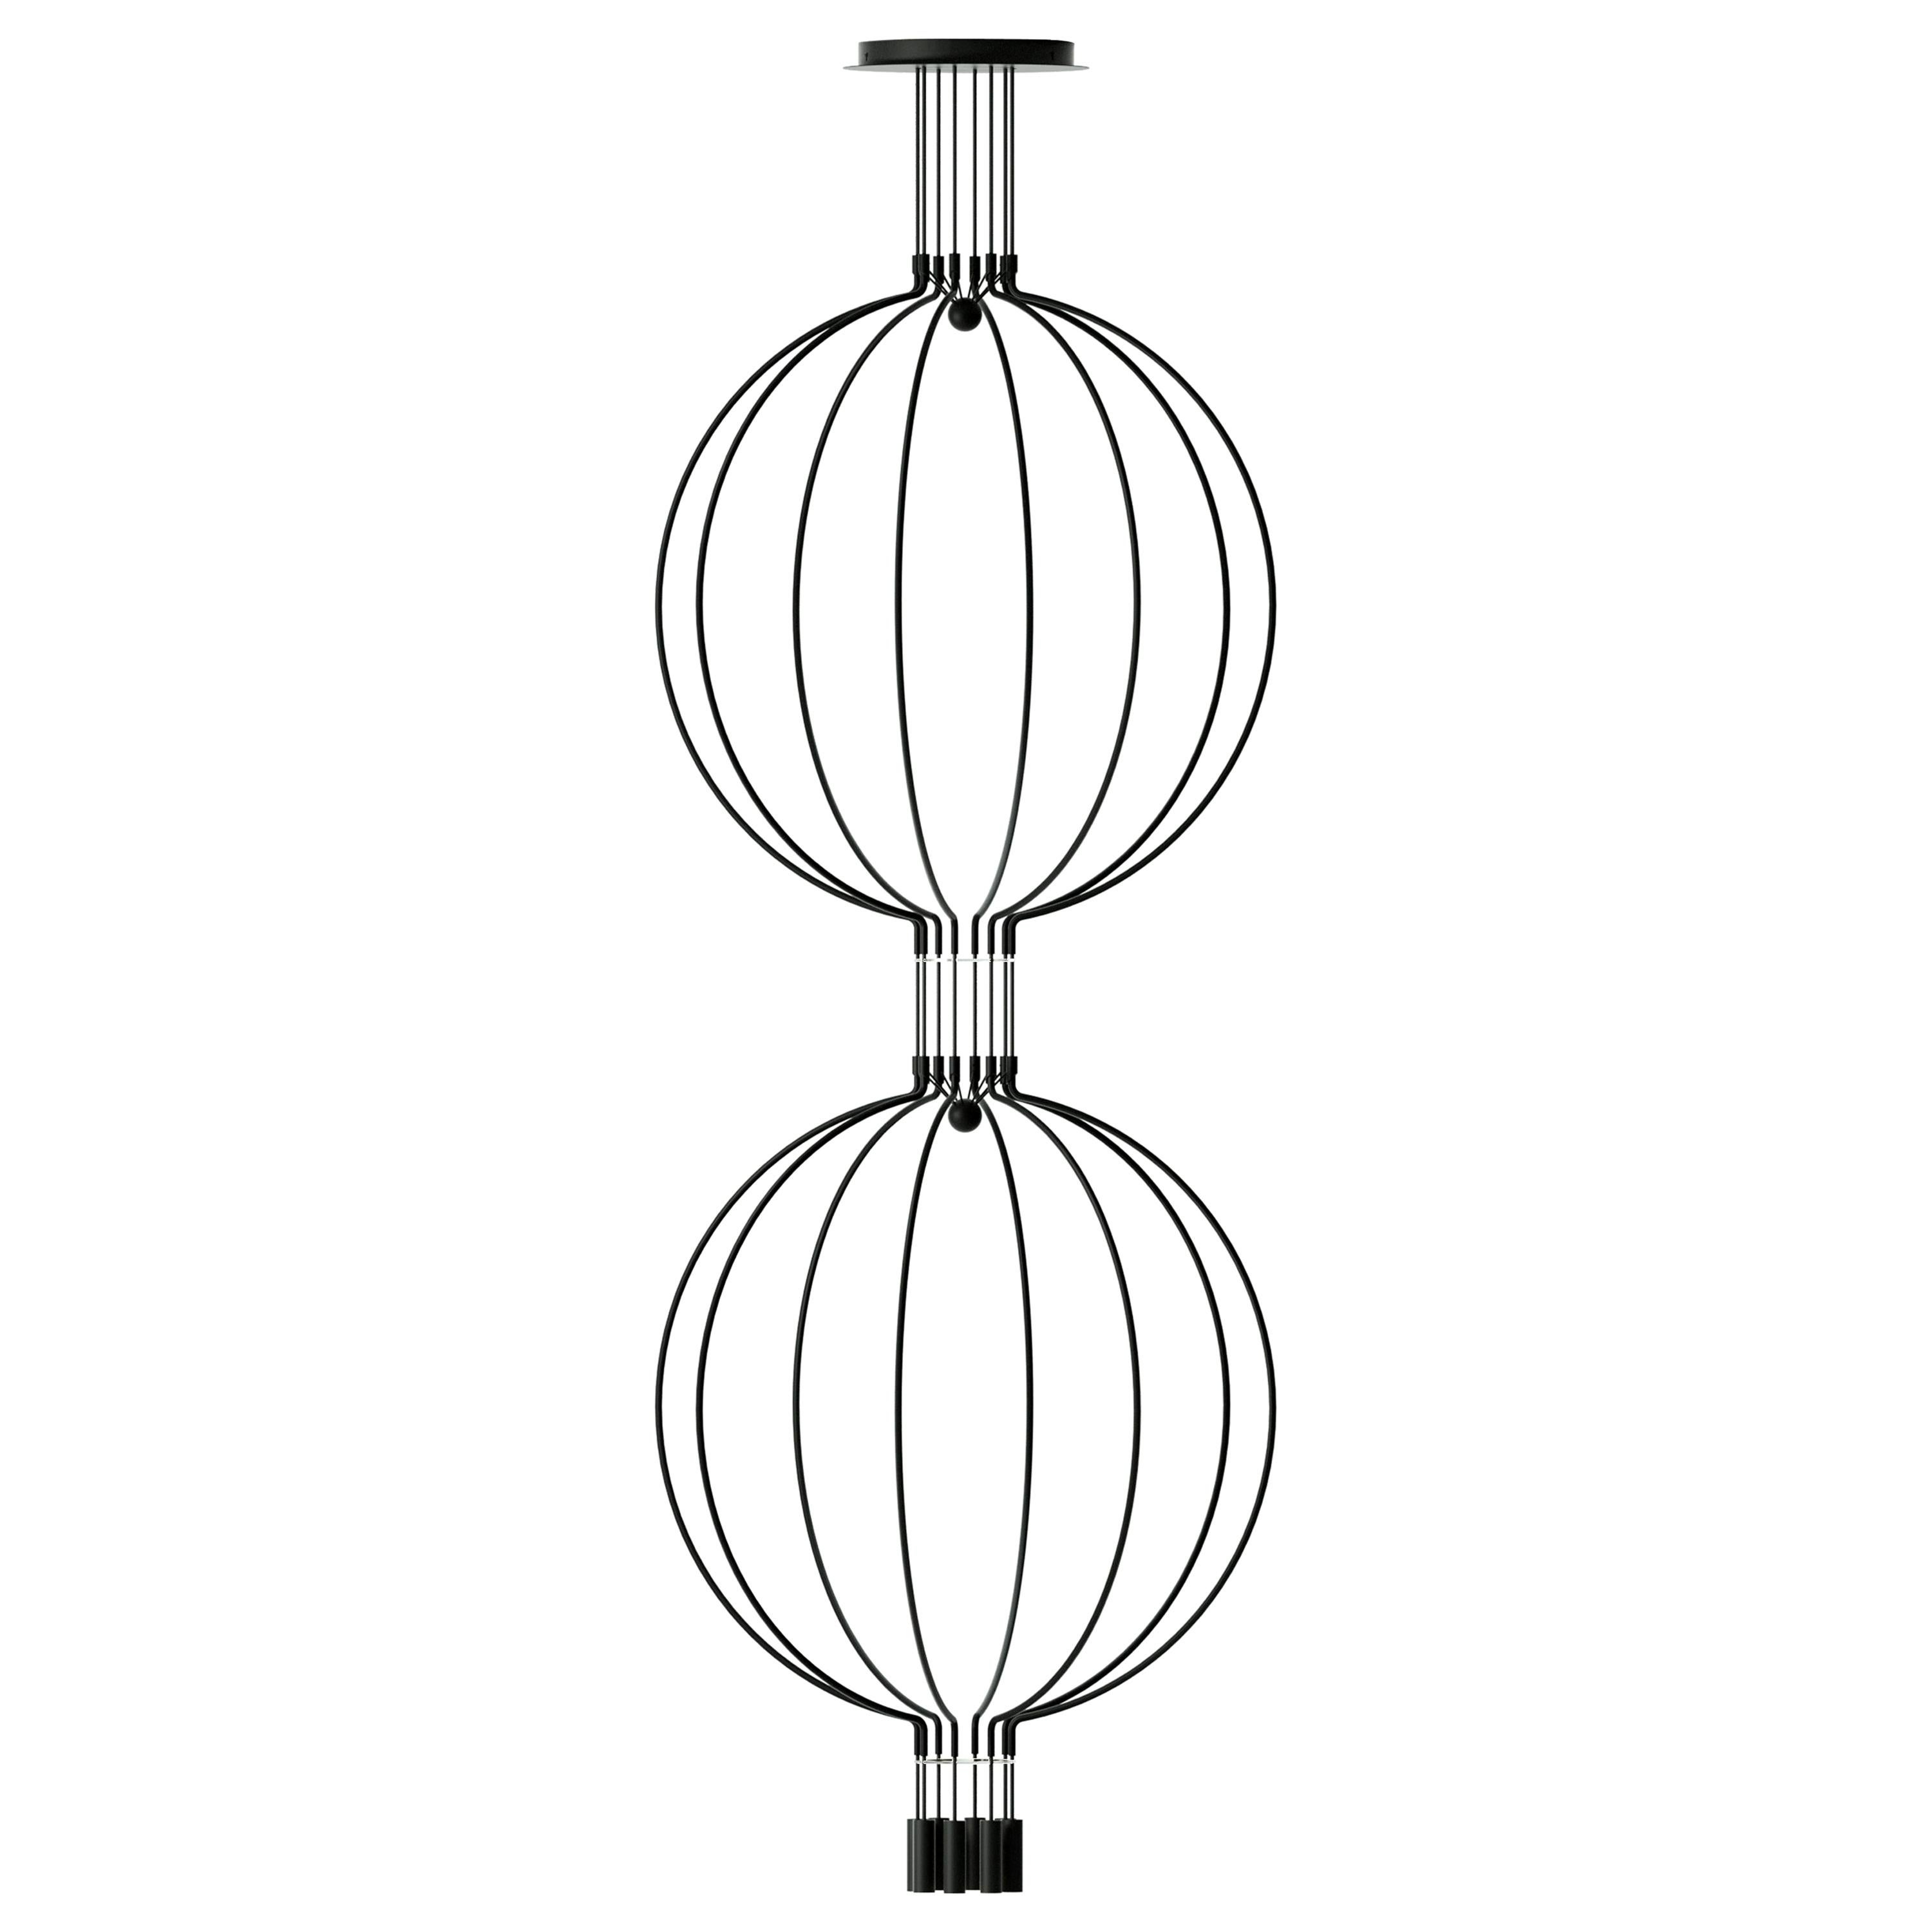 Liaison DG8 a Grand and Elegant in a 2-Tiers Big-Size LED Pendant with 8-Light